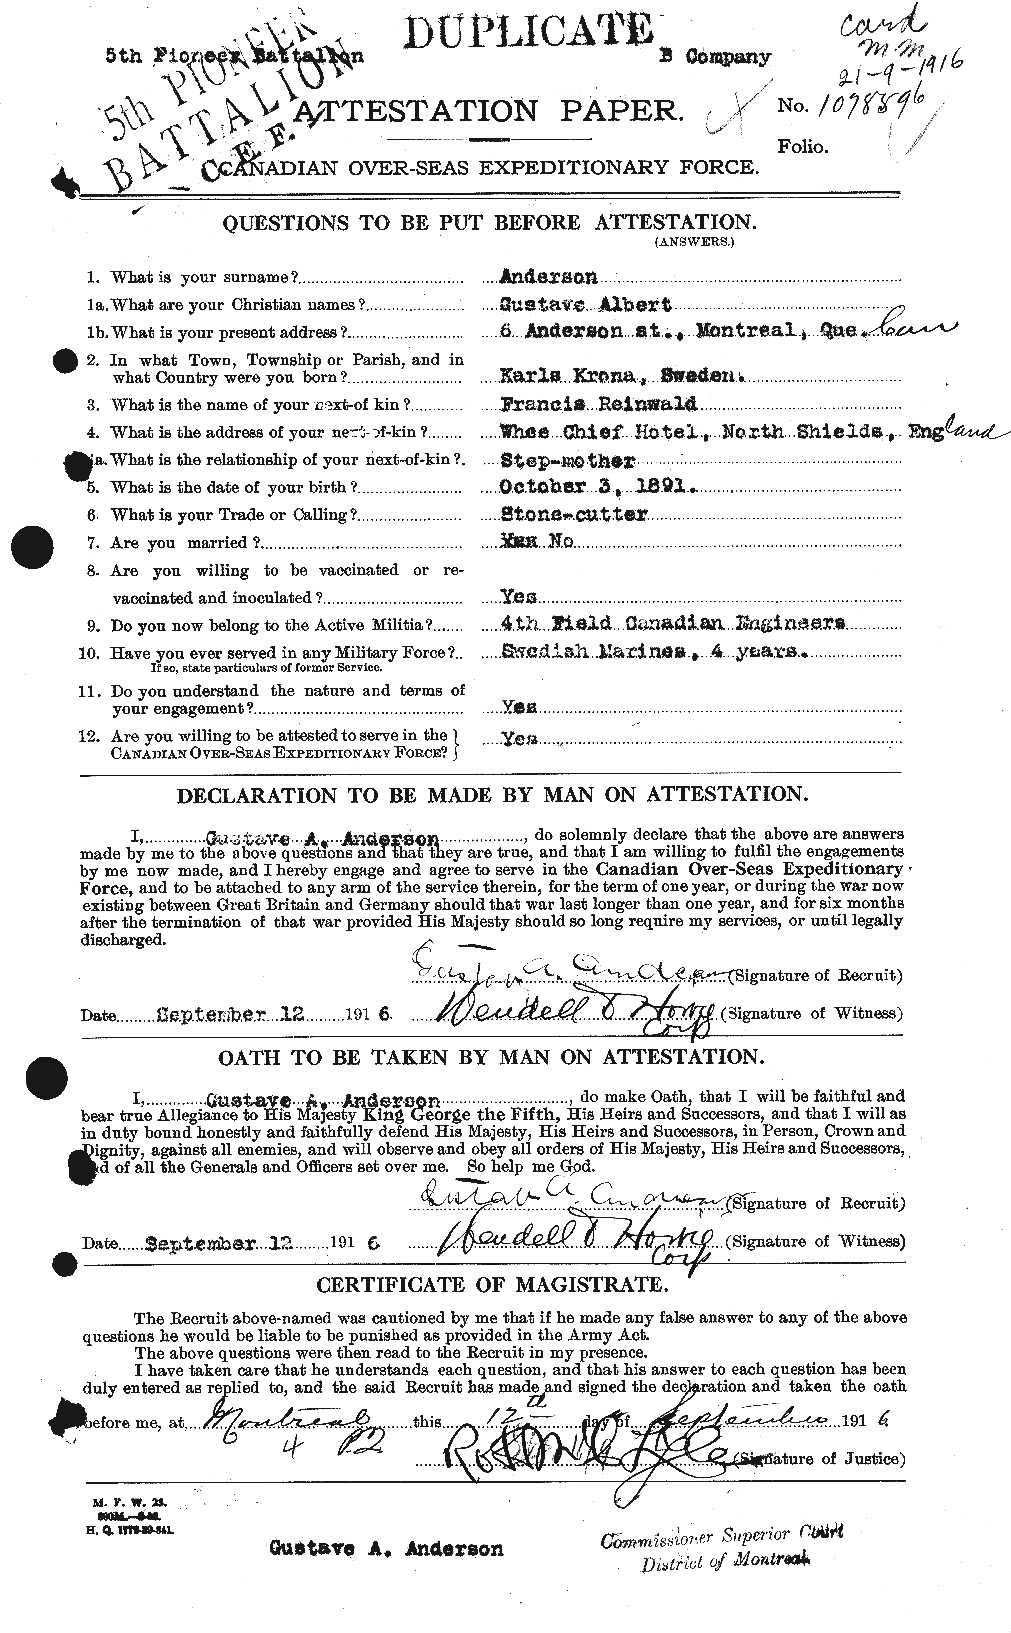 Personnel Records of the First World War - CEF 209643a